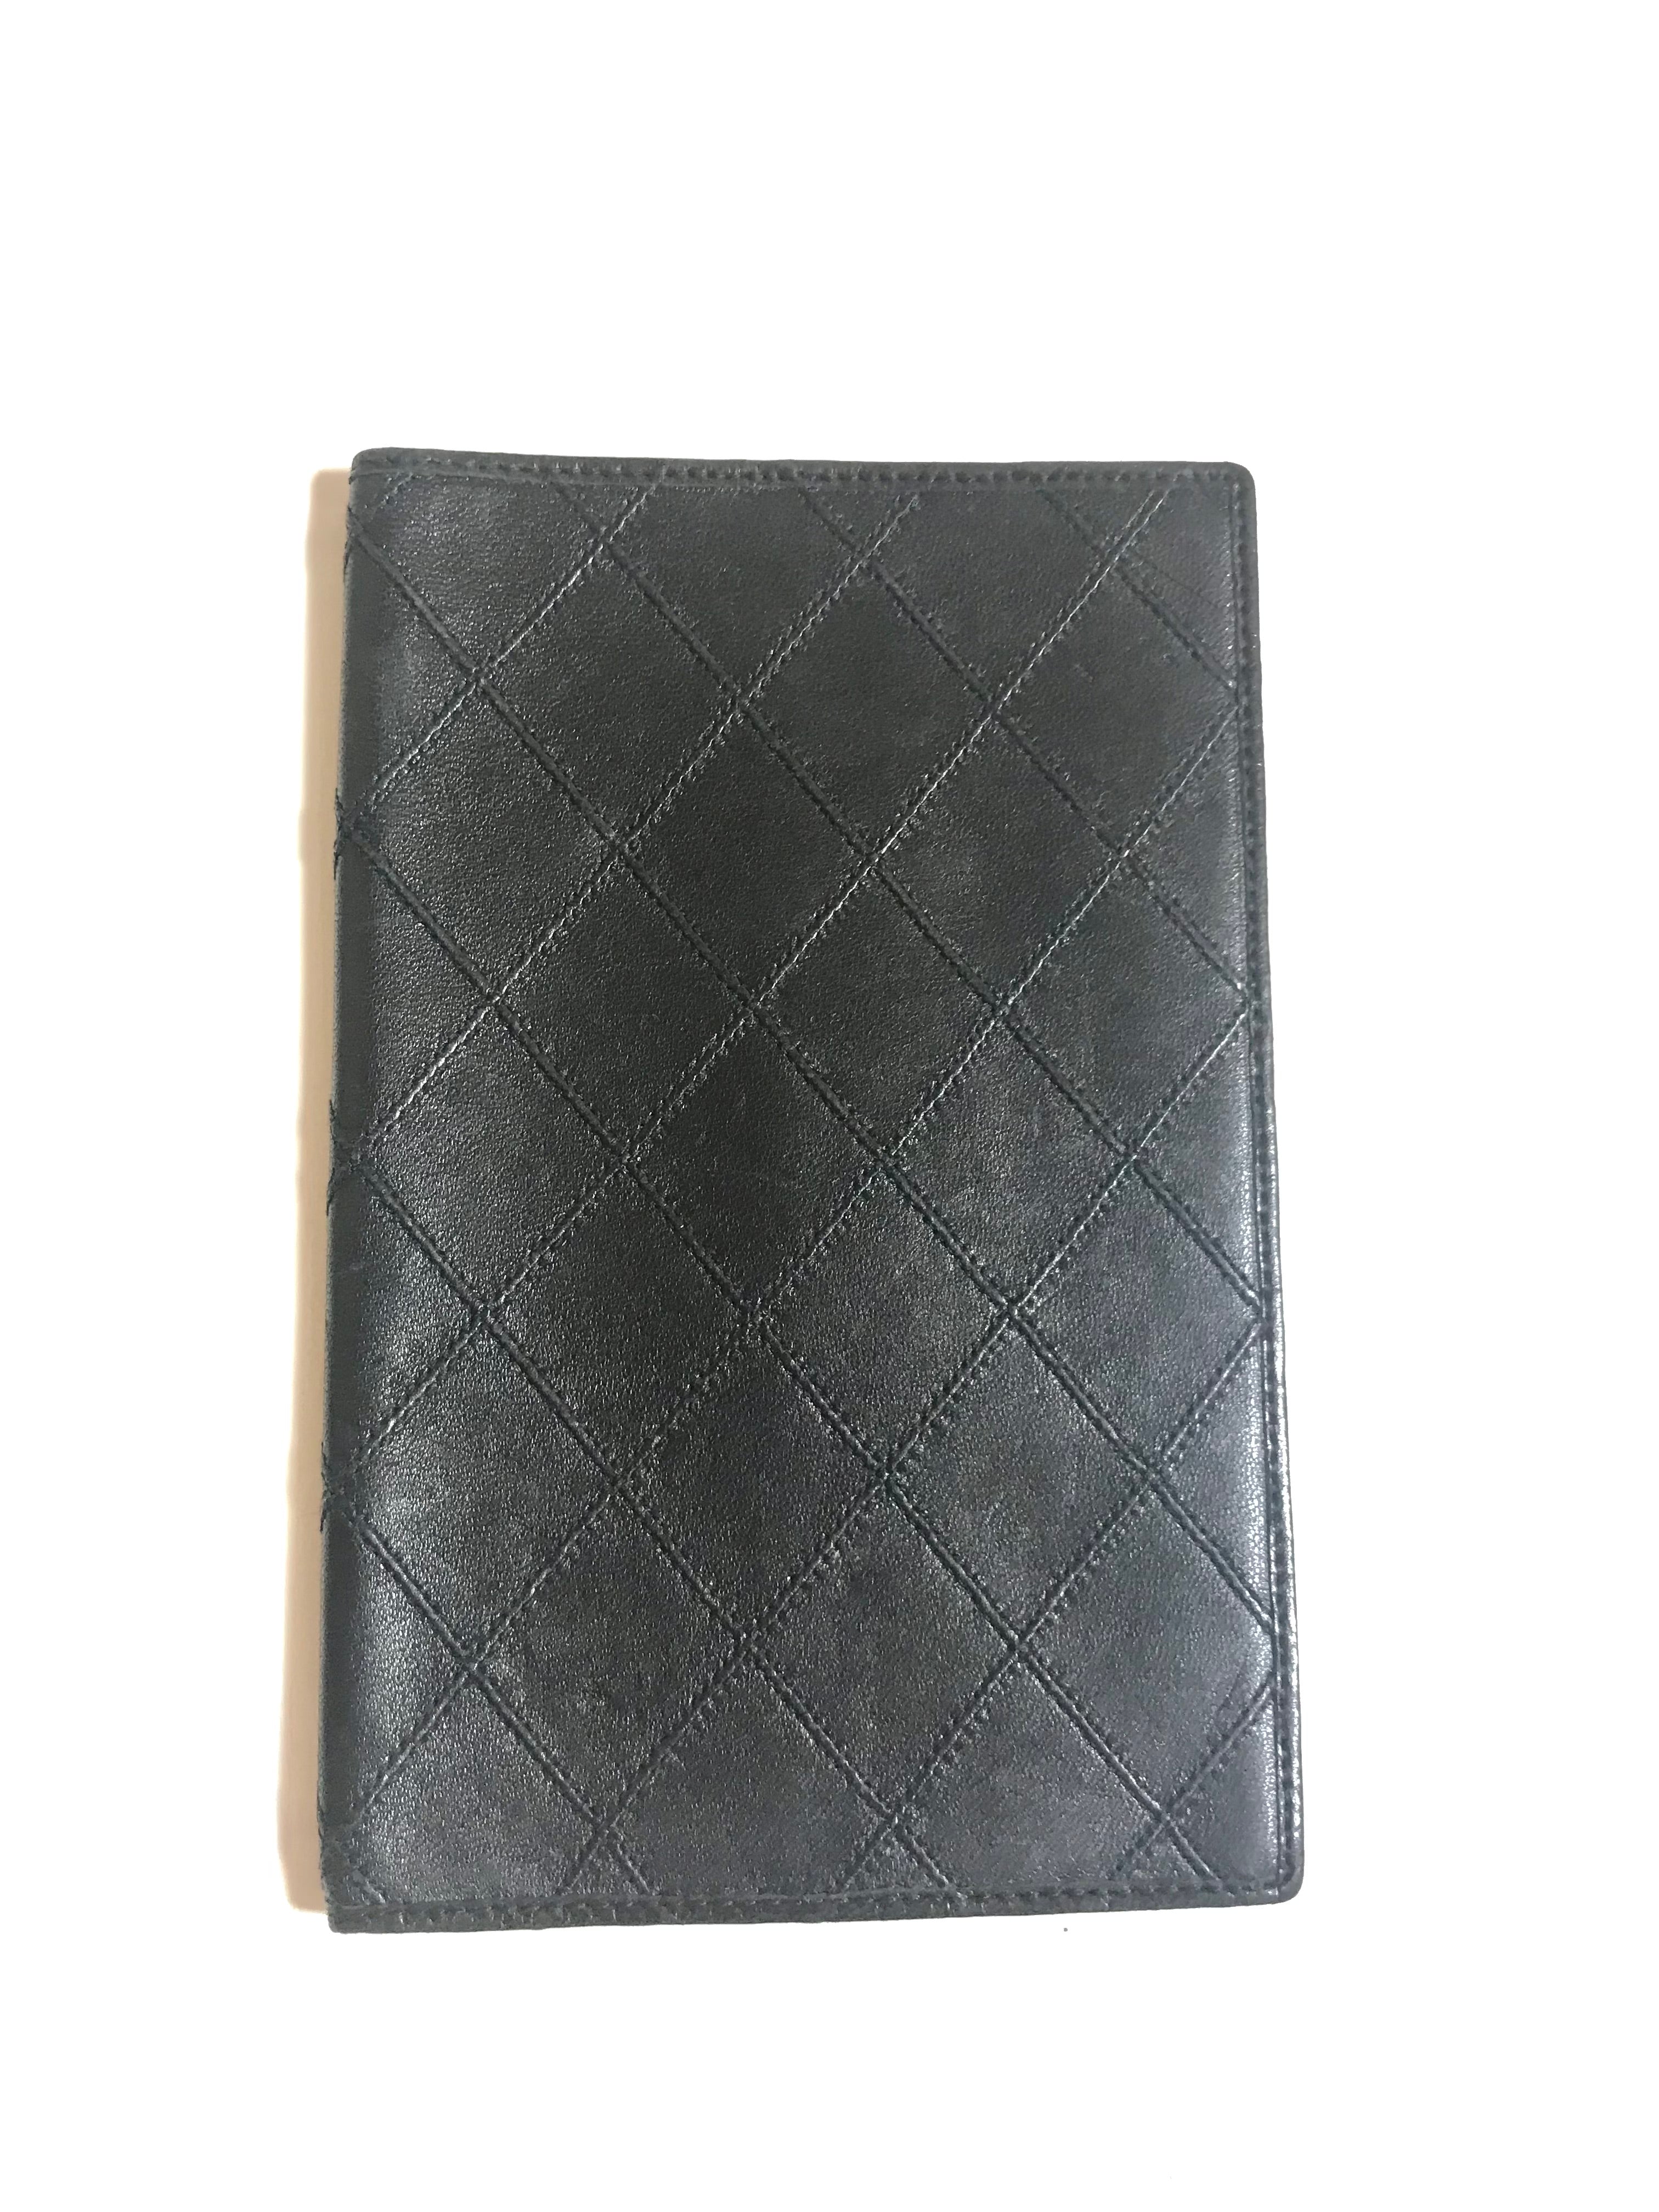 Chanel Red CC Leather Agenda Notebook Cover Chanel